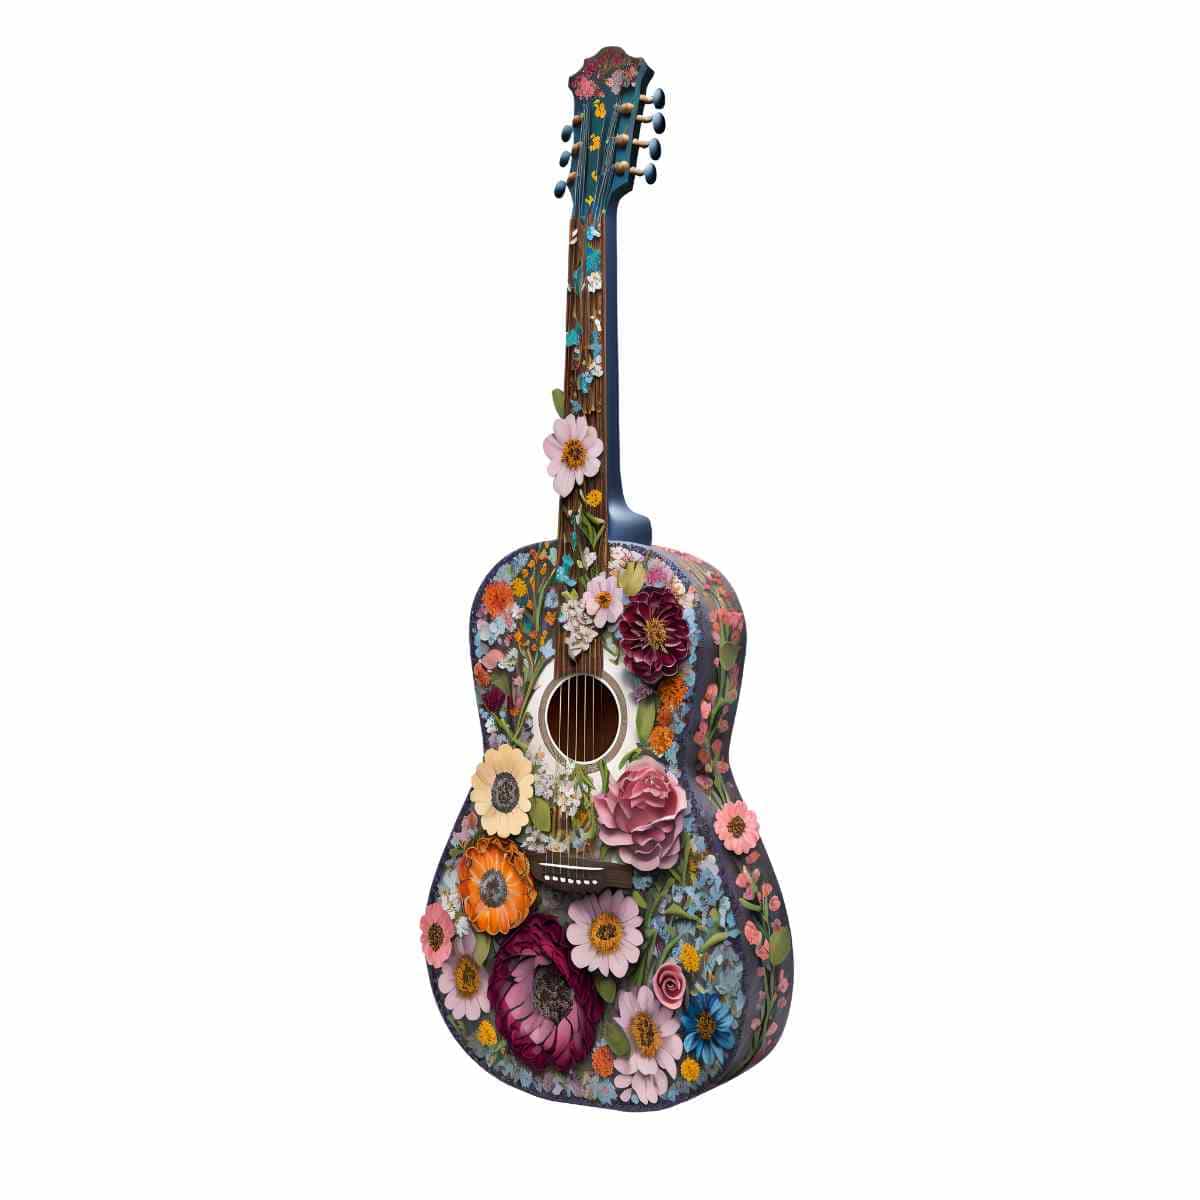 Animal Jigsaw Puzzle > Wooden Jigsaw Puzzle > Jigsaw Puzzle A4 Guitar - Jigsaw Puzzle